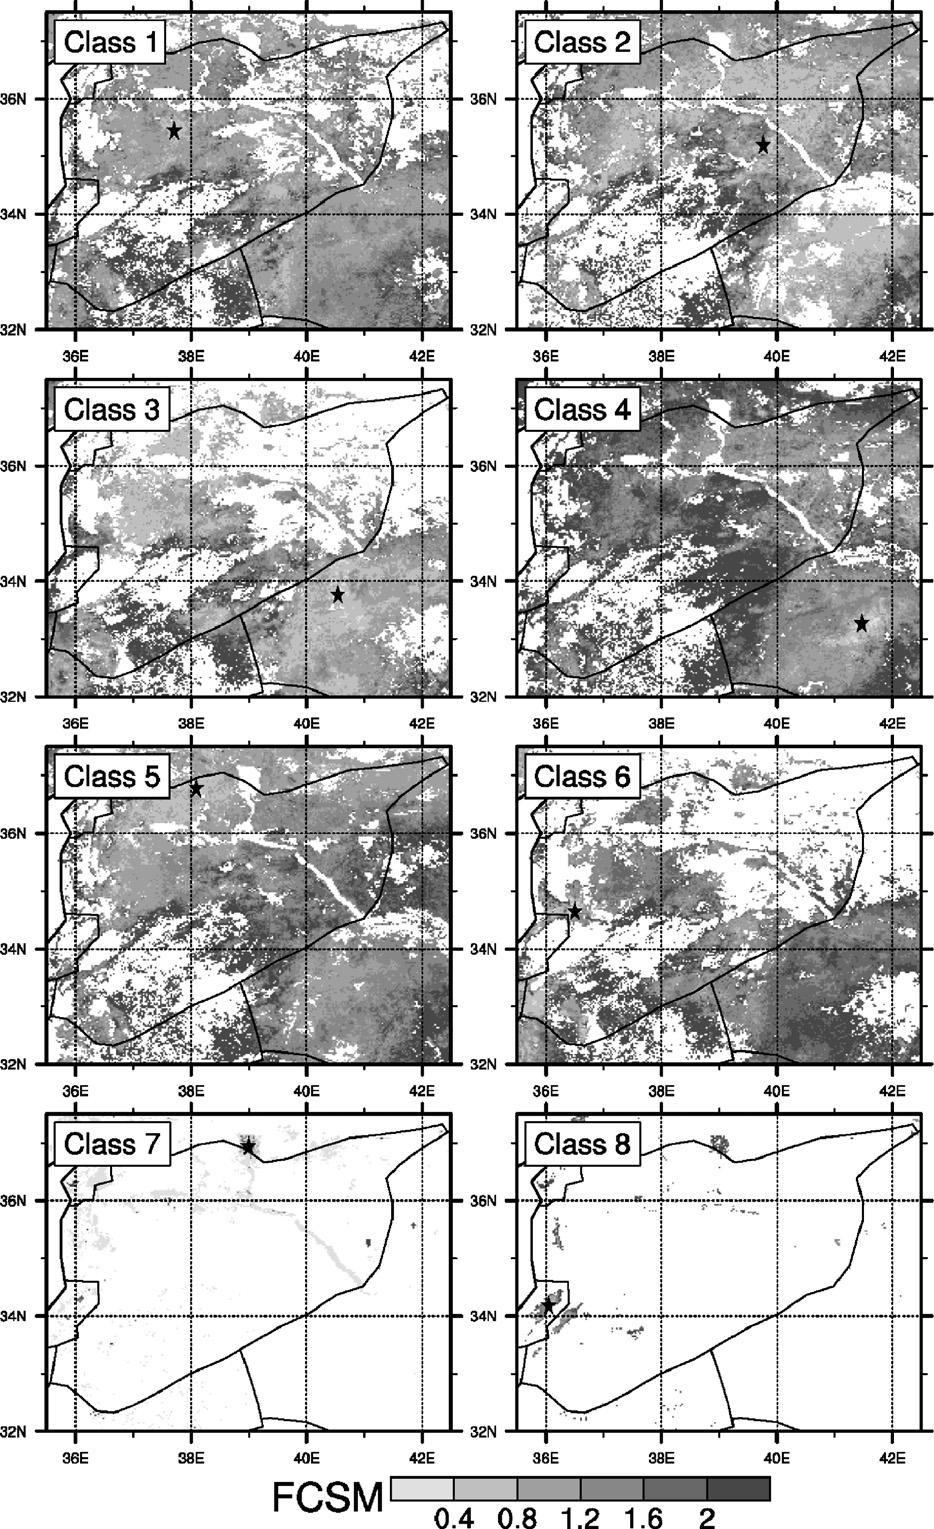 J.P. Evans, R. Geerken / Remote Sensing of Environment 105 (2006) 1 8 5 Fig. 2. FCSM maps for each class. The star indicates the location of the reference pixel for each class.